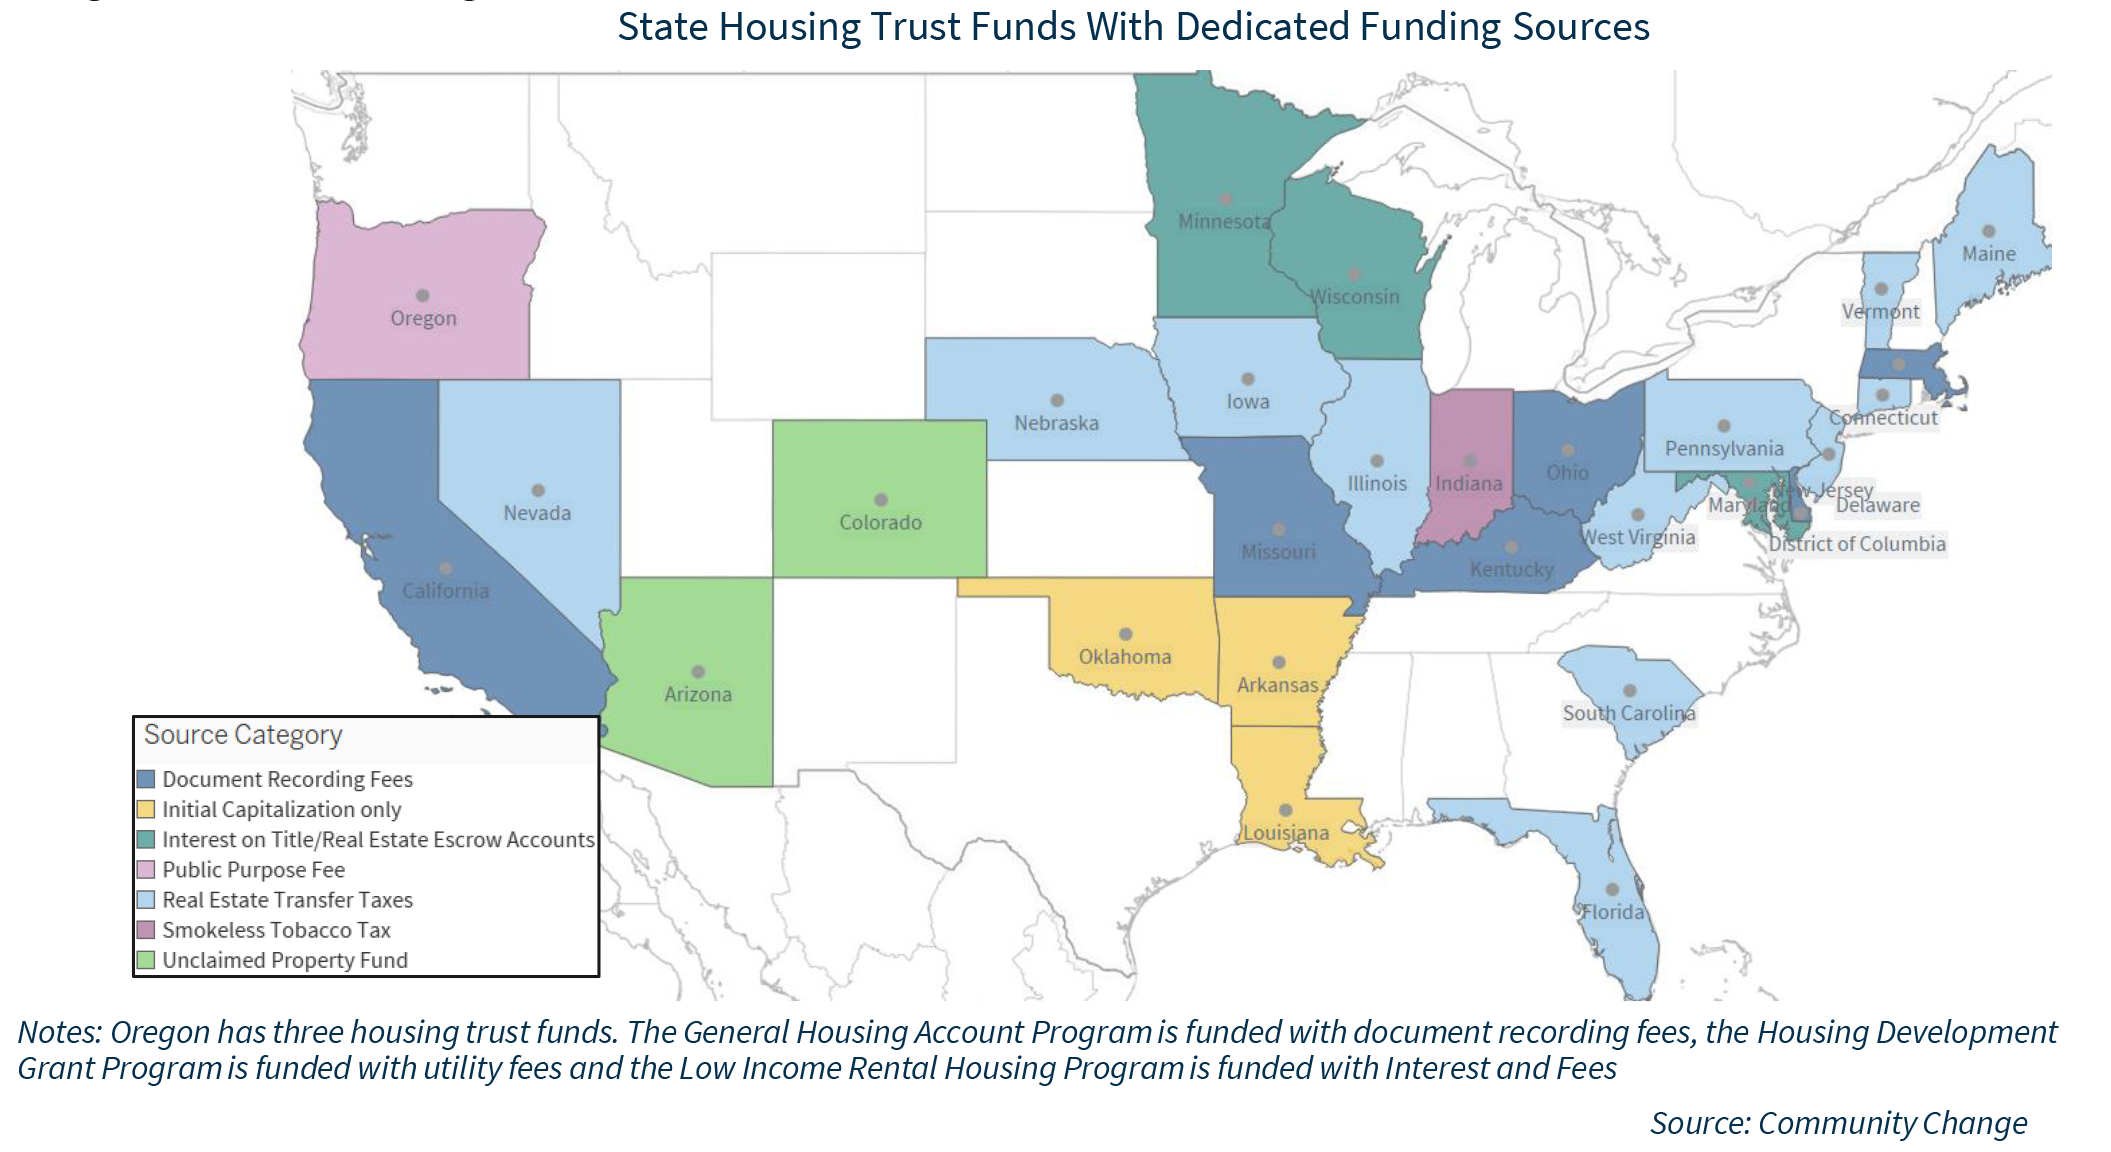 State Housing Trust Funds With Dedicated Funding Sources